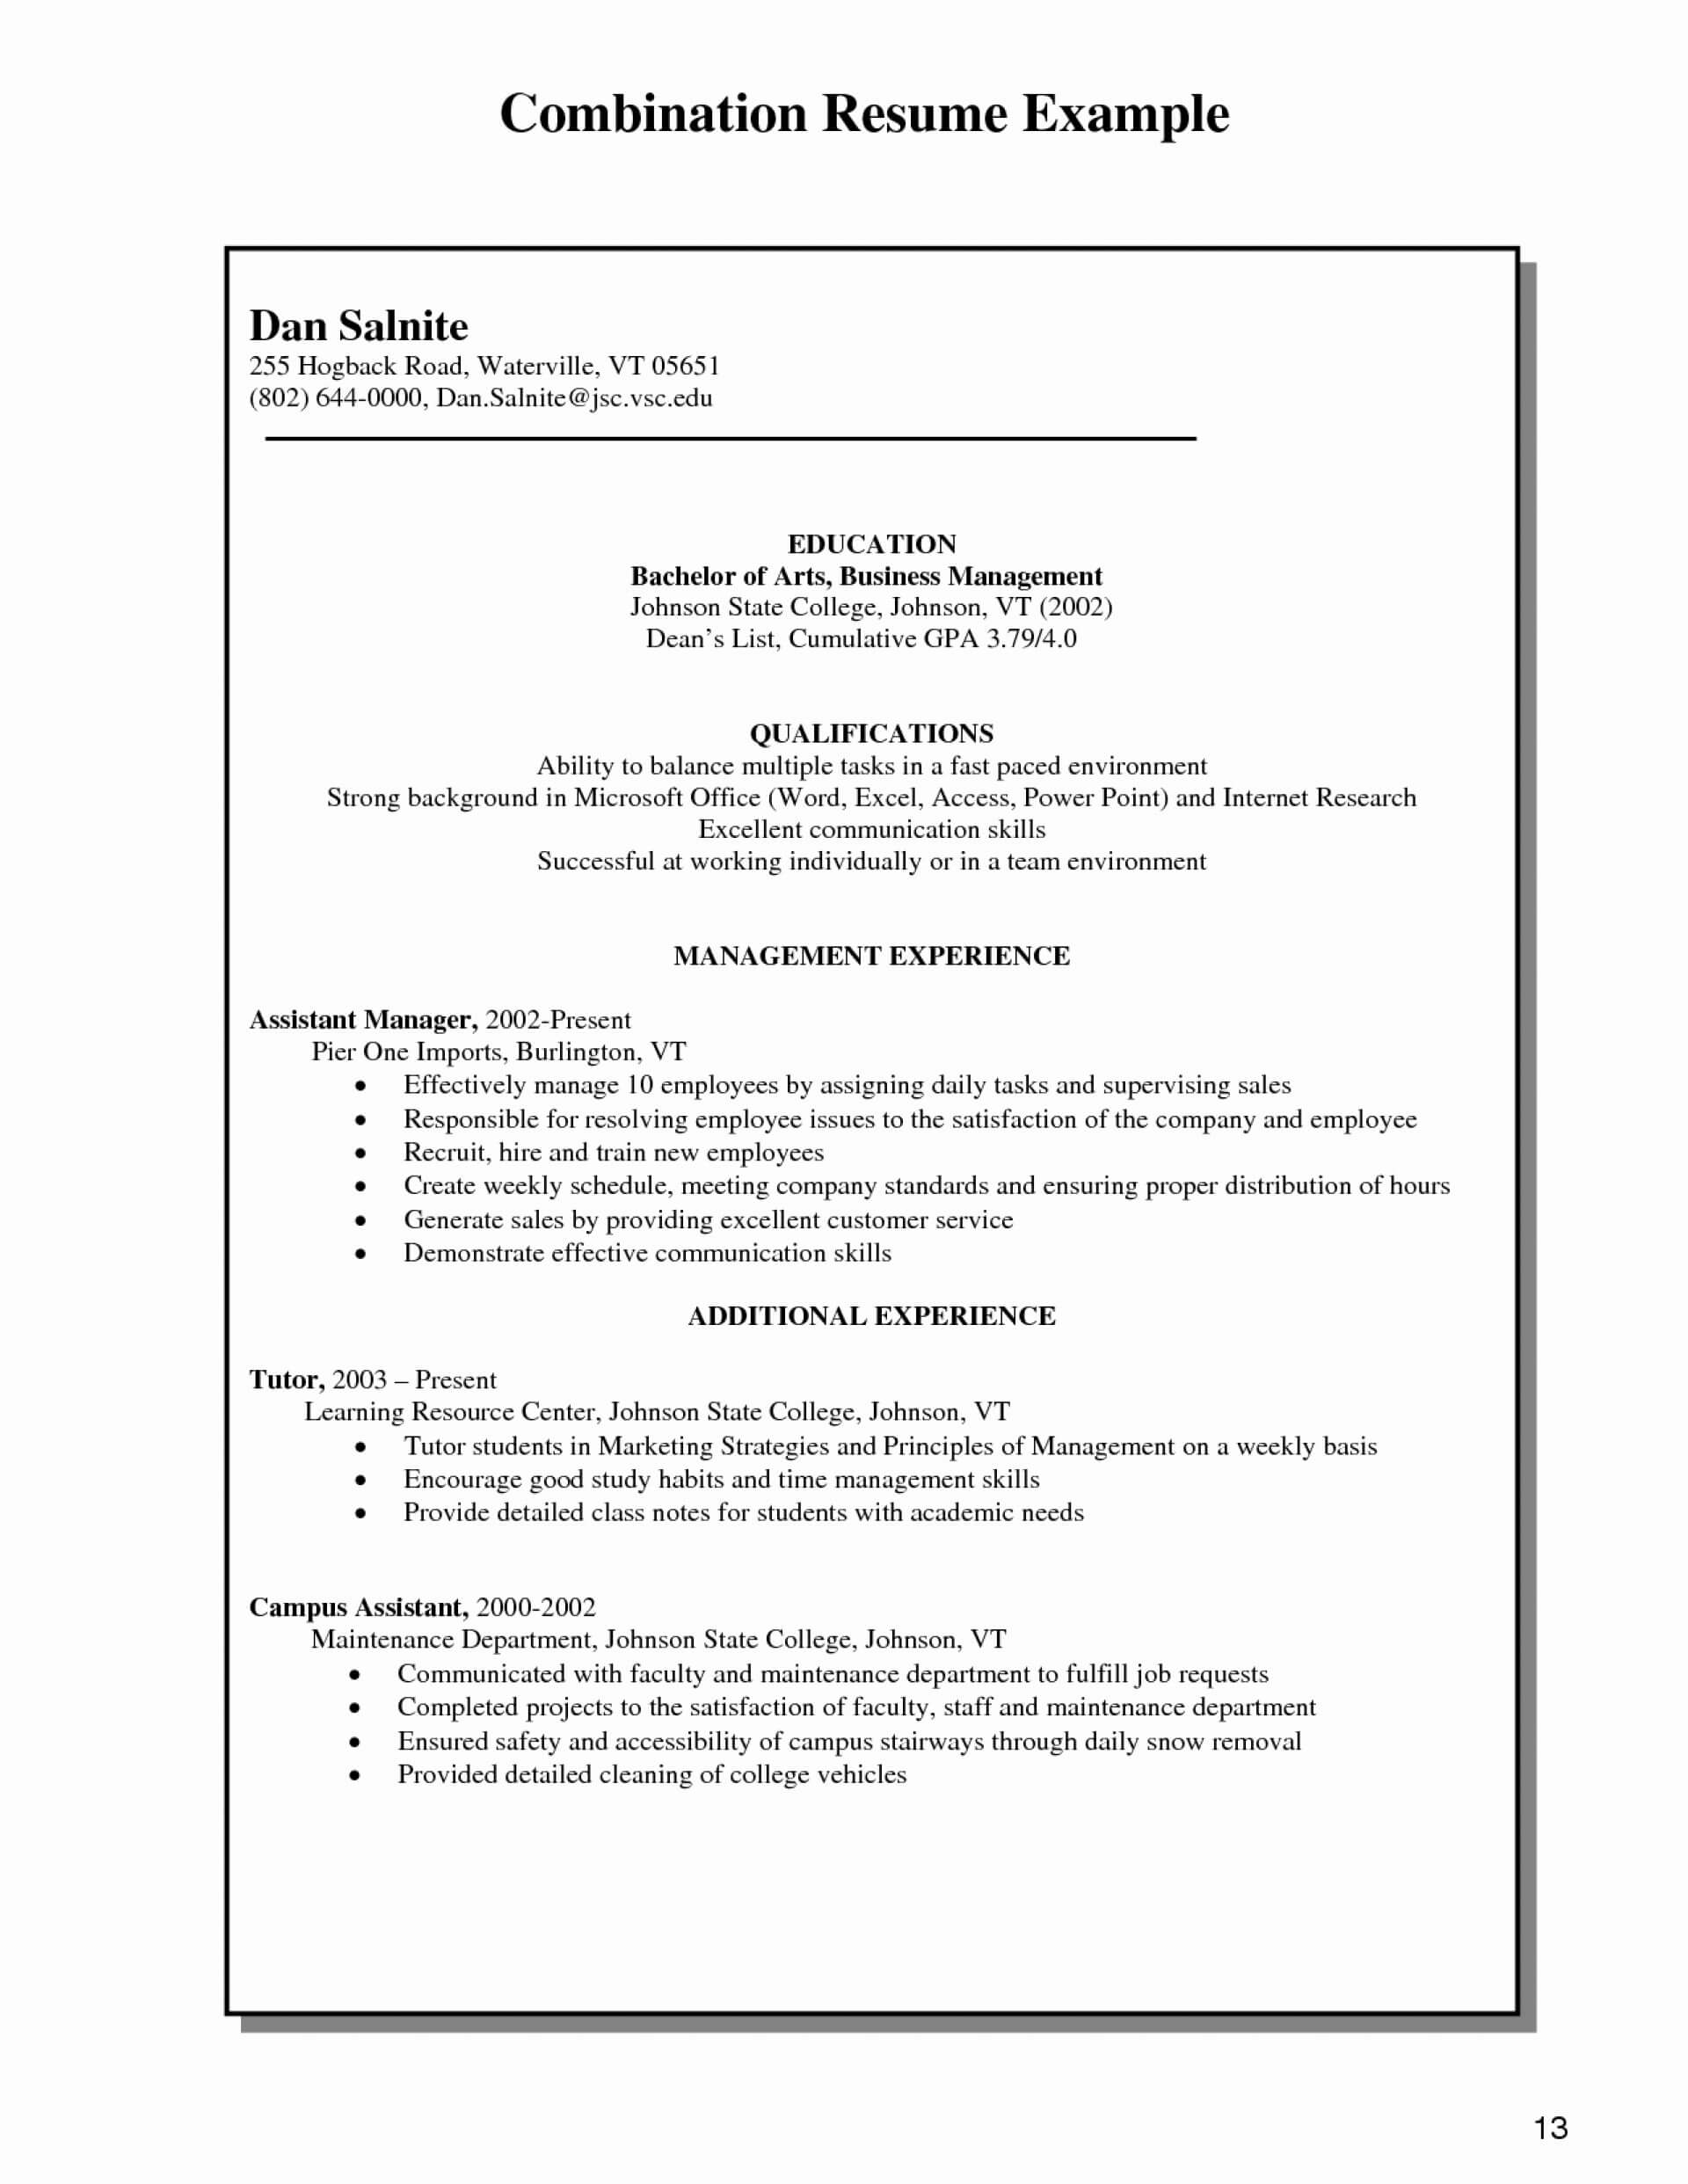 029 Combination Resume Template Word Free Templates 27 1 With Regard To Combination Resume Template Word